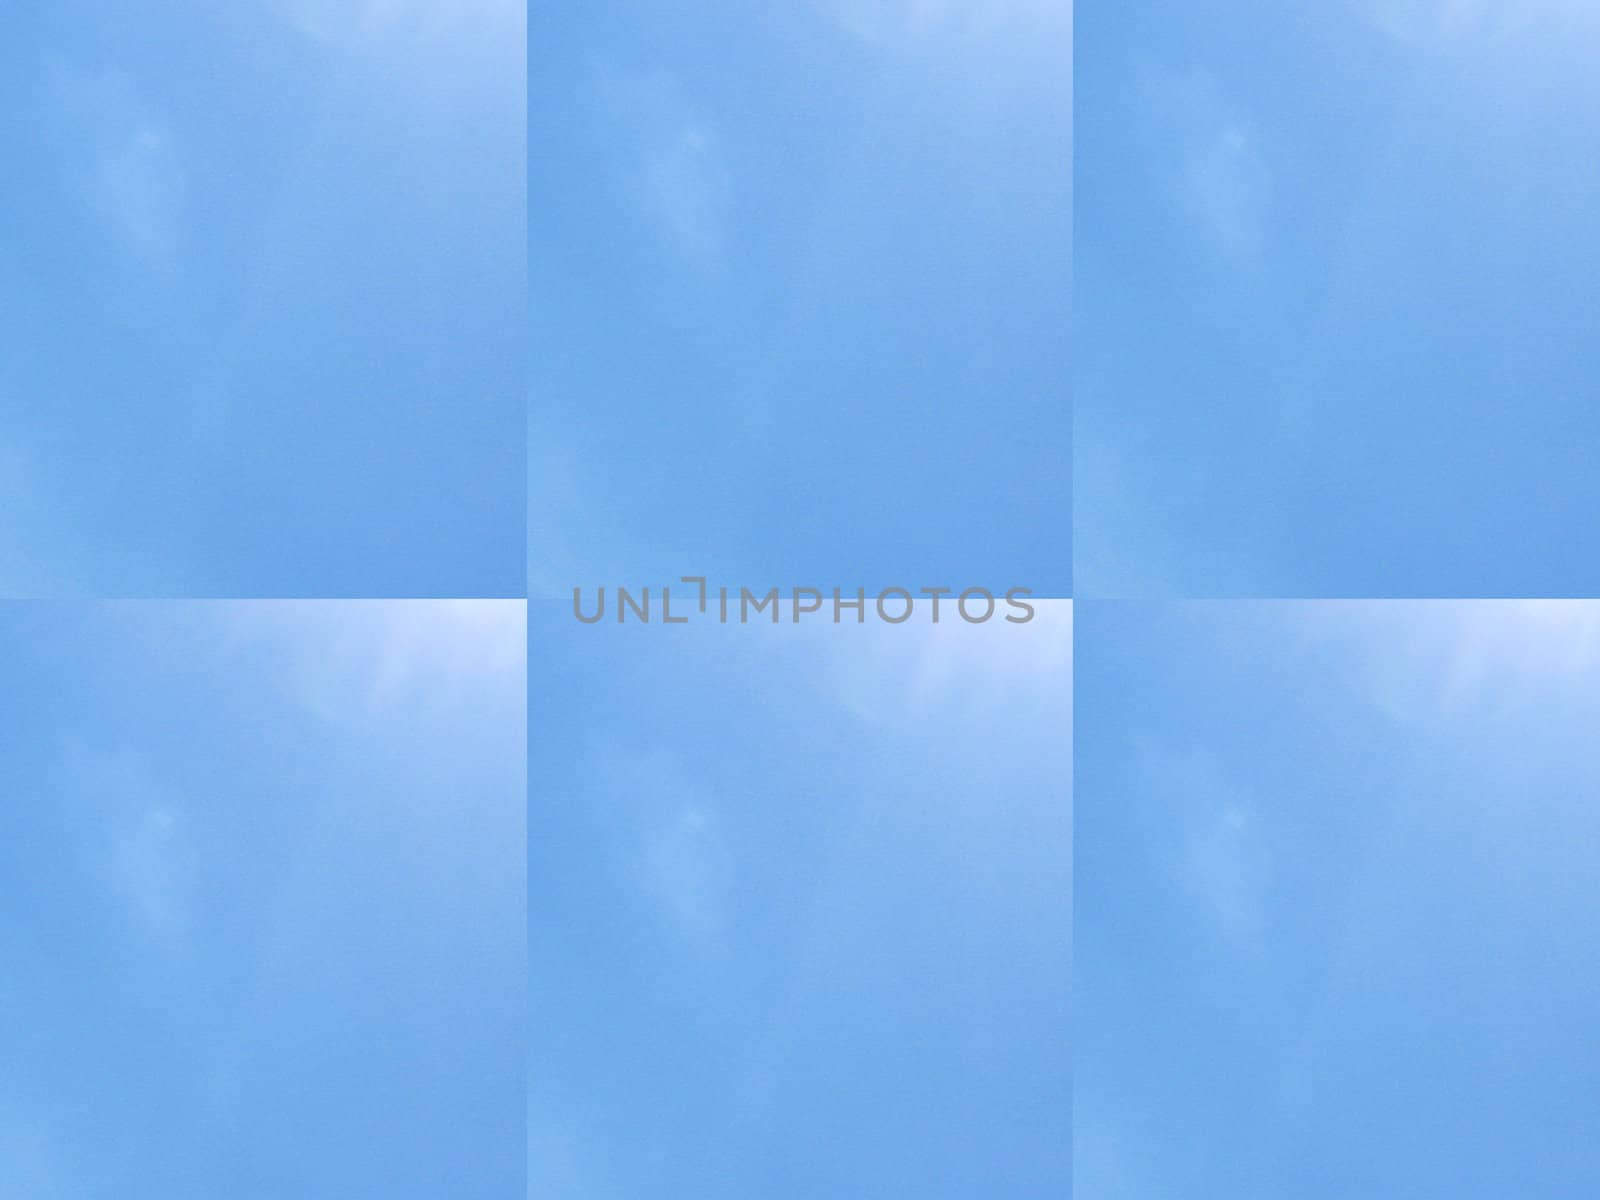 Image of light and blue abstract background